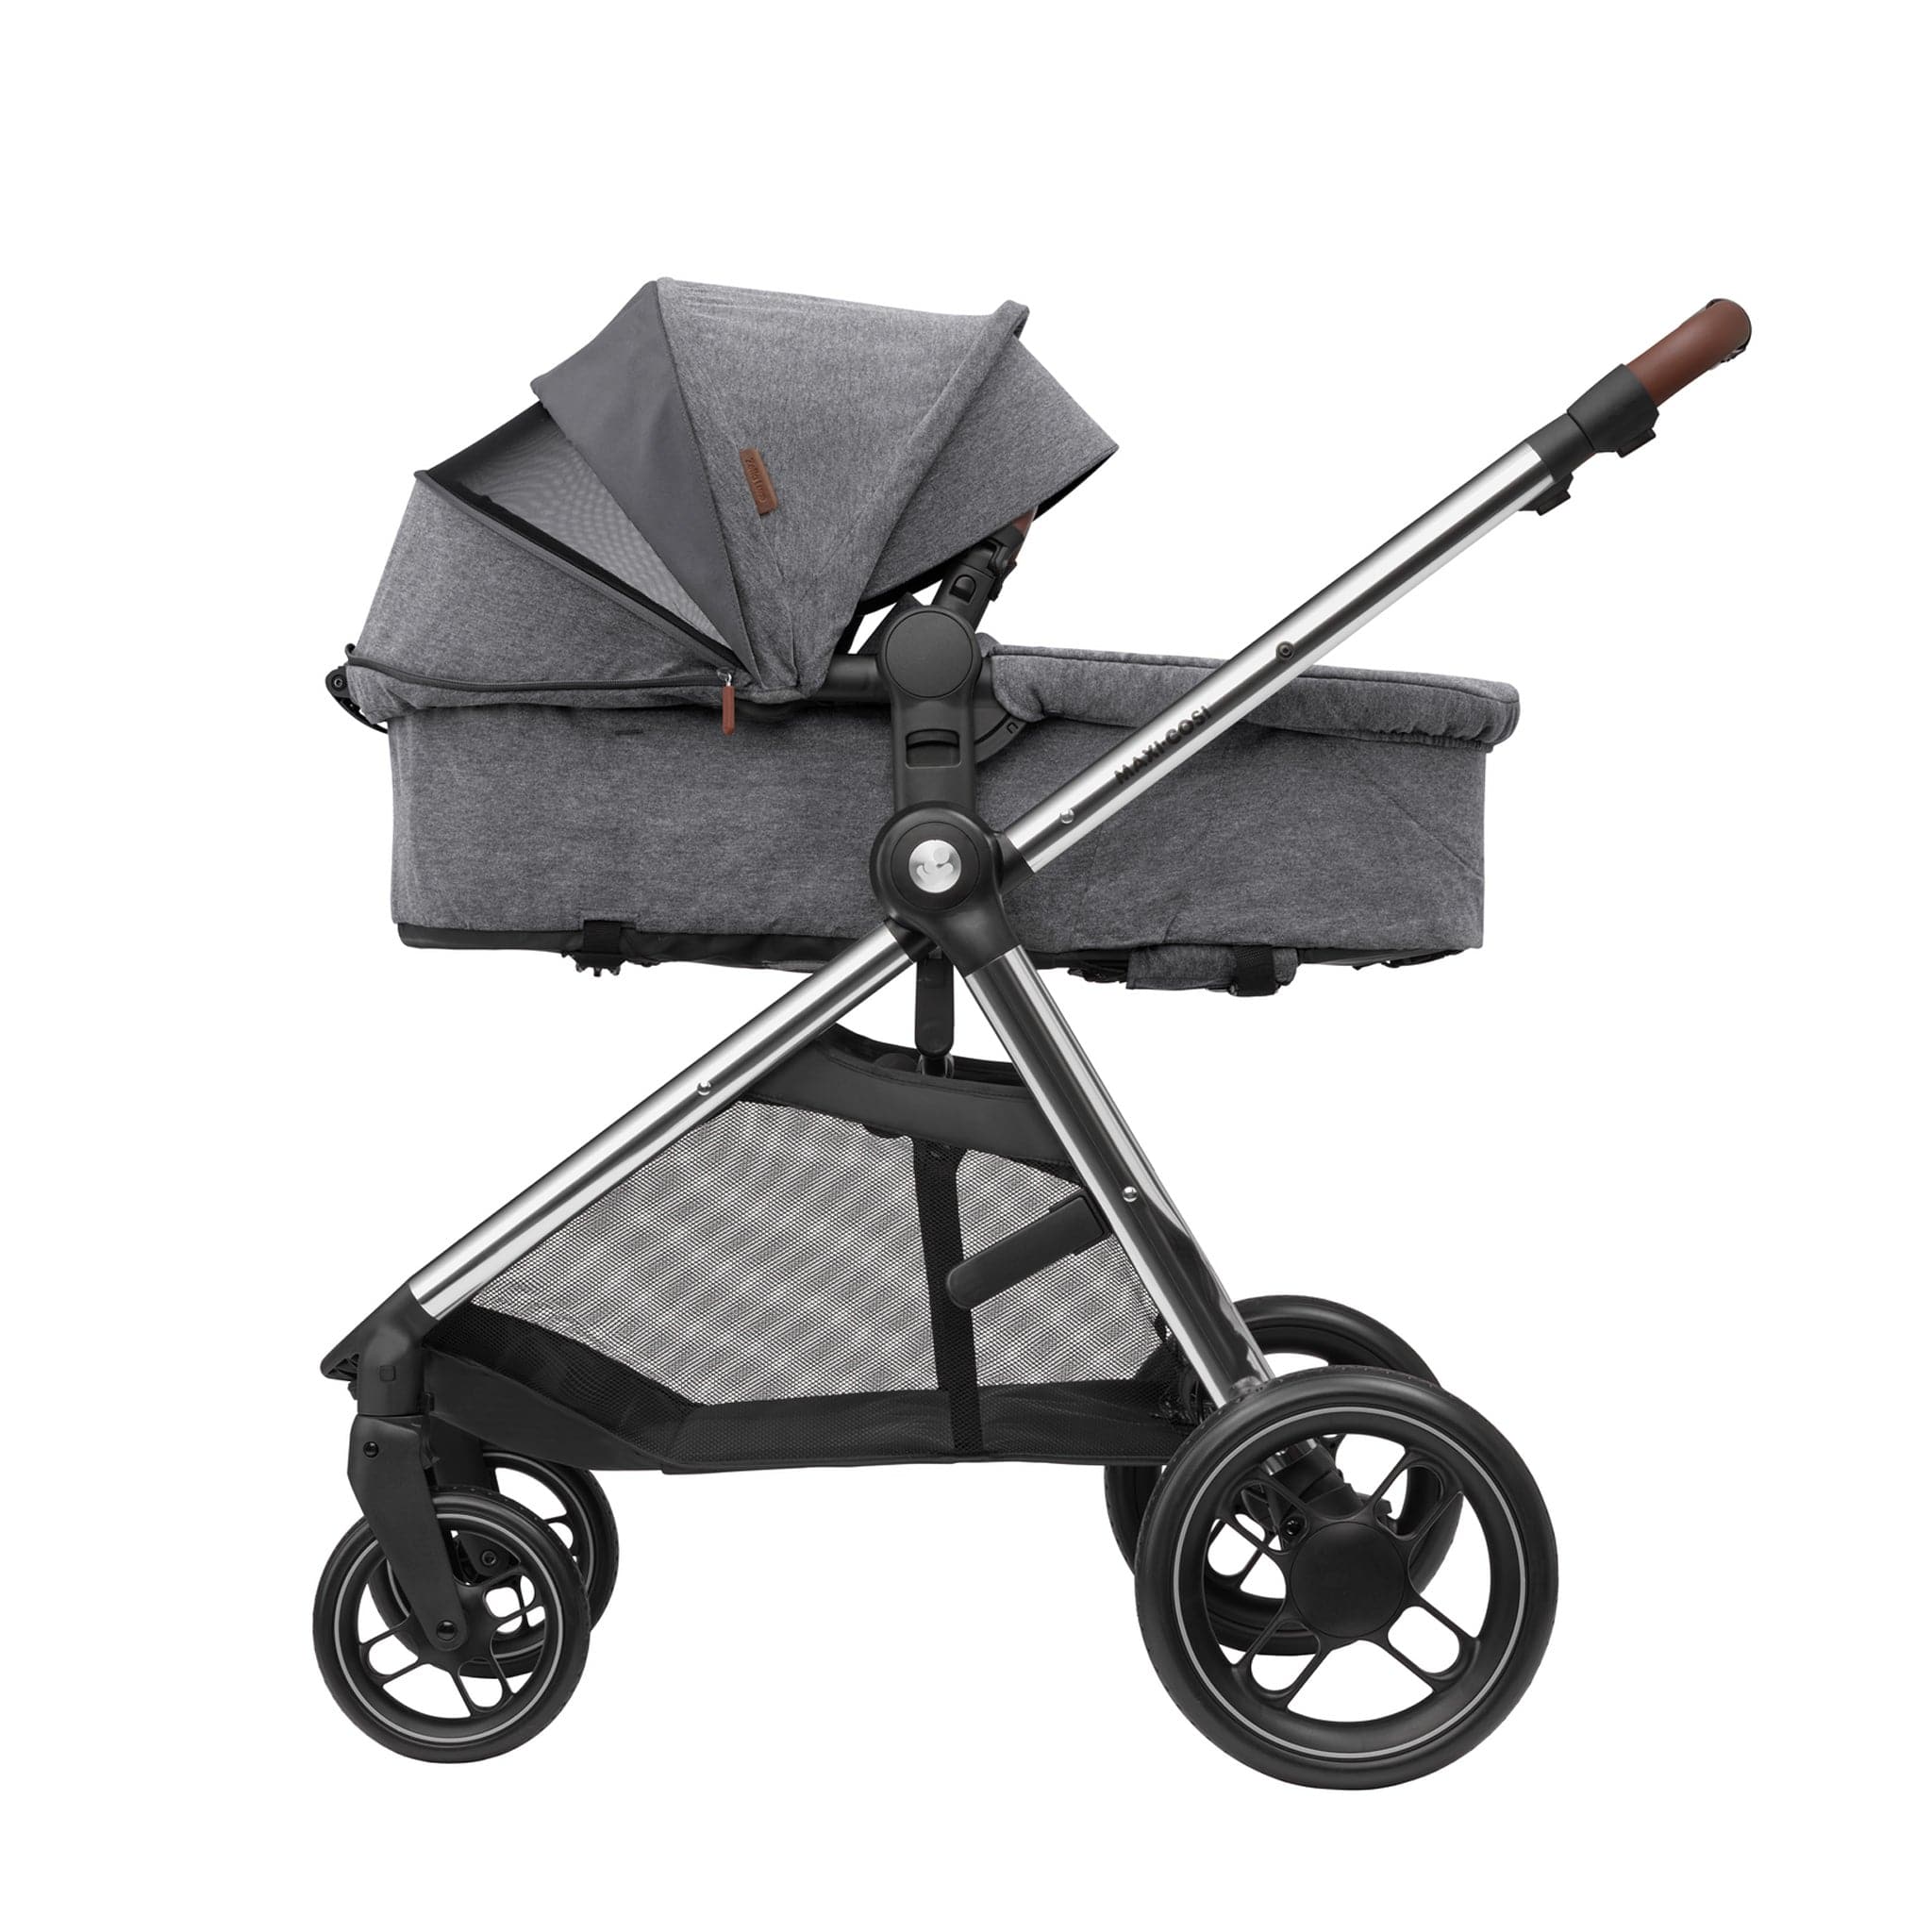 Maxi-Cosi travel systems Maxi-Cosi Zelia Luxe with Cabriofix i-Size Travel System in Twillic Grey